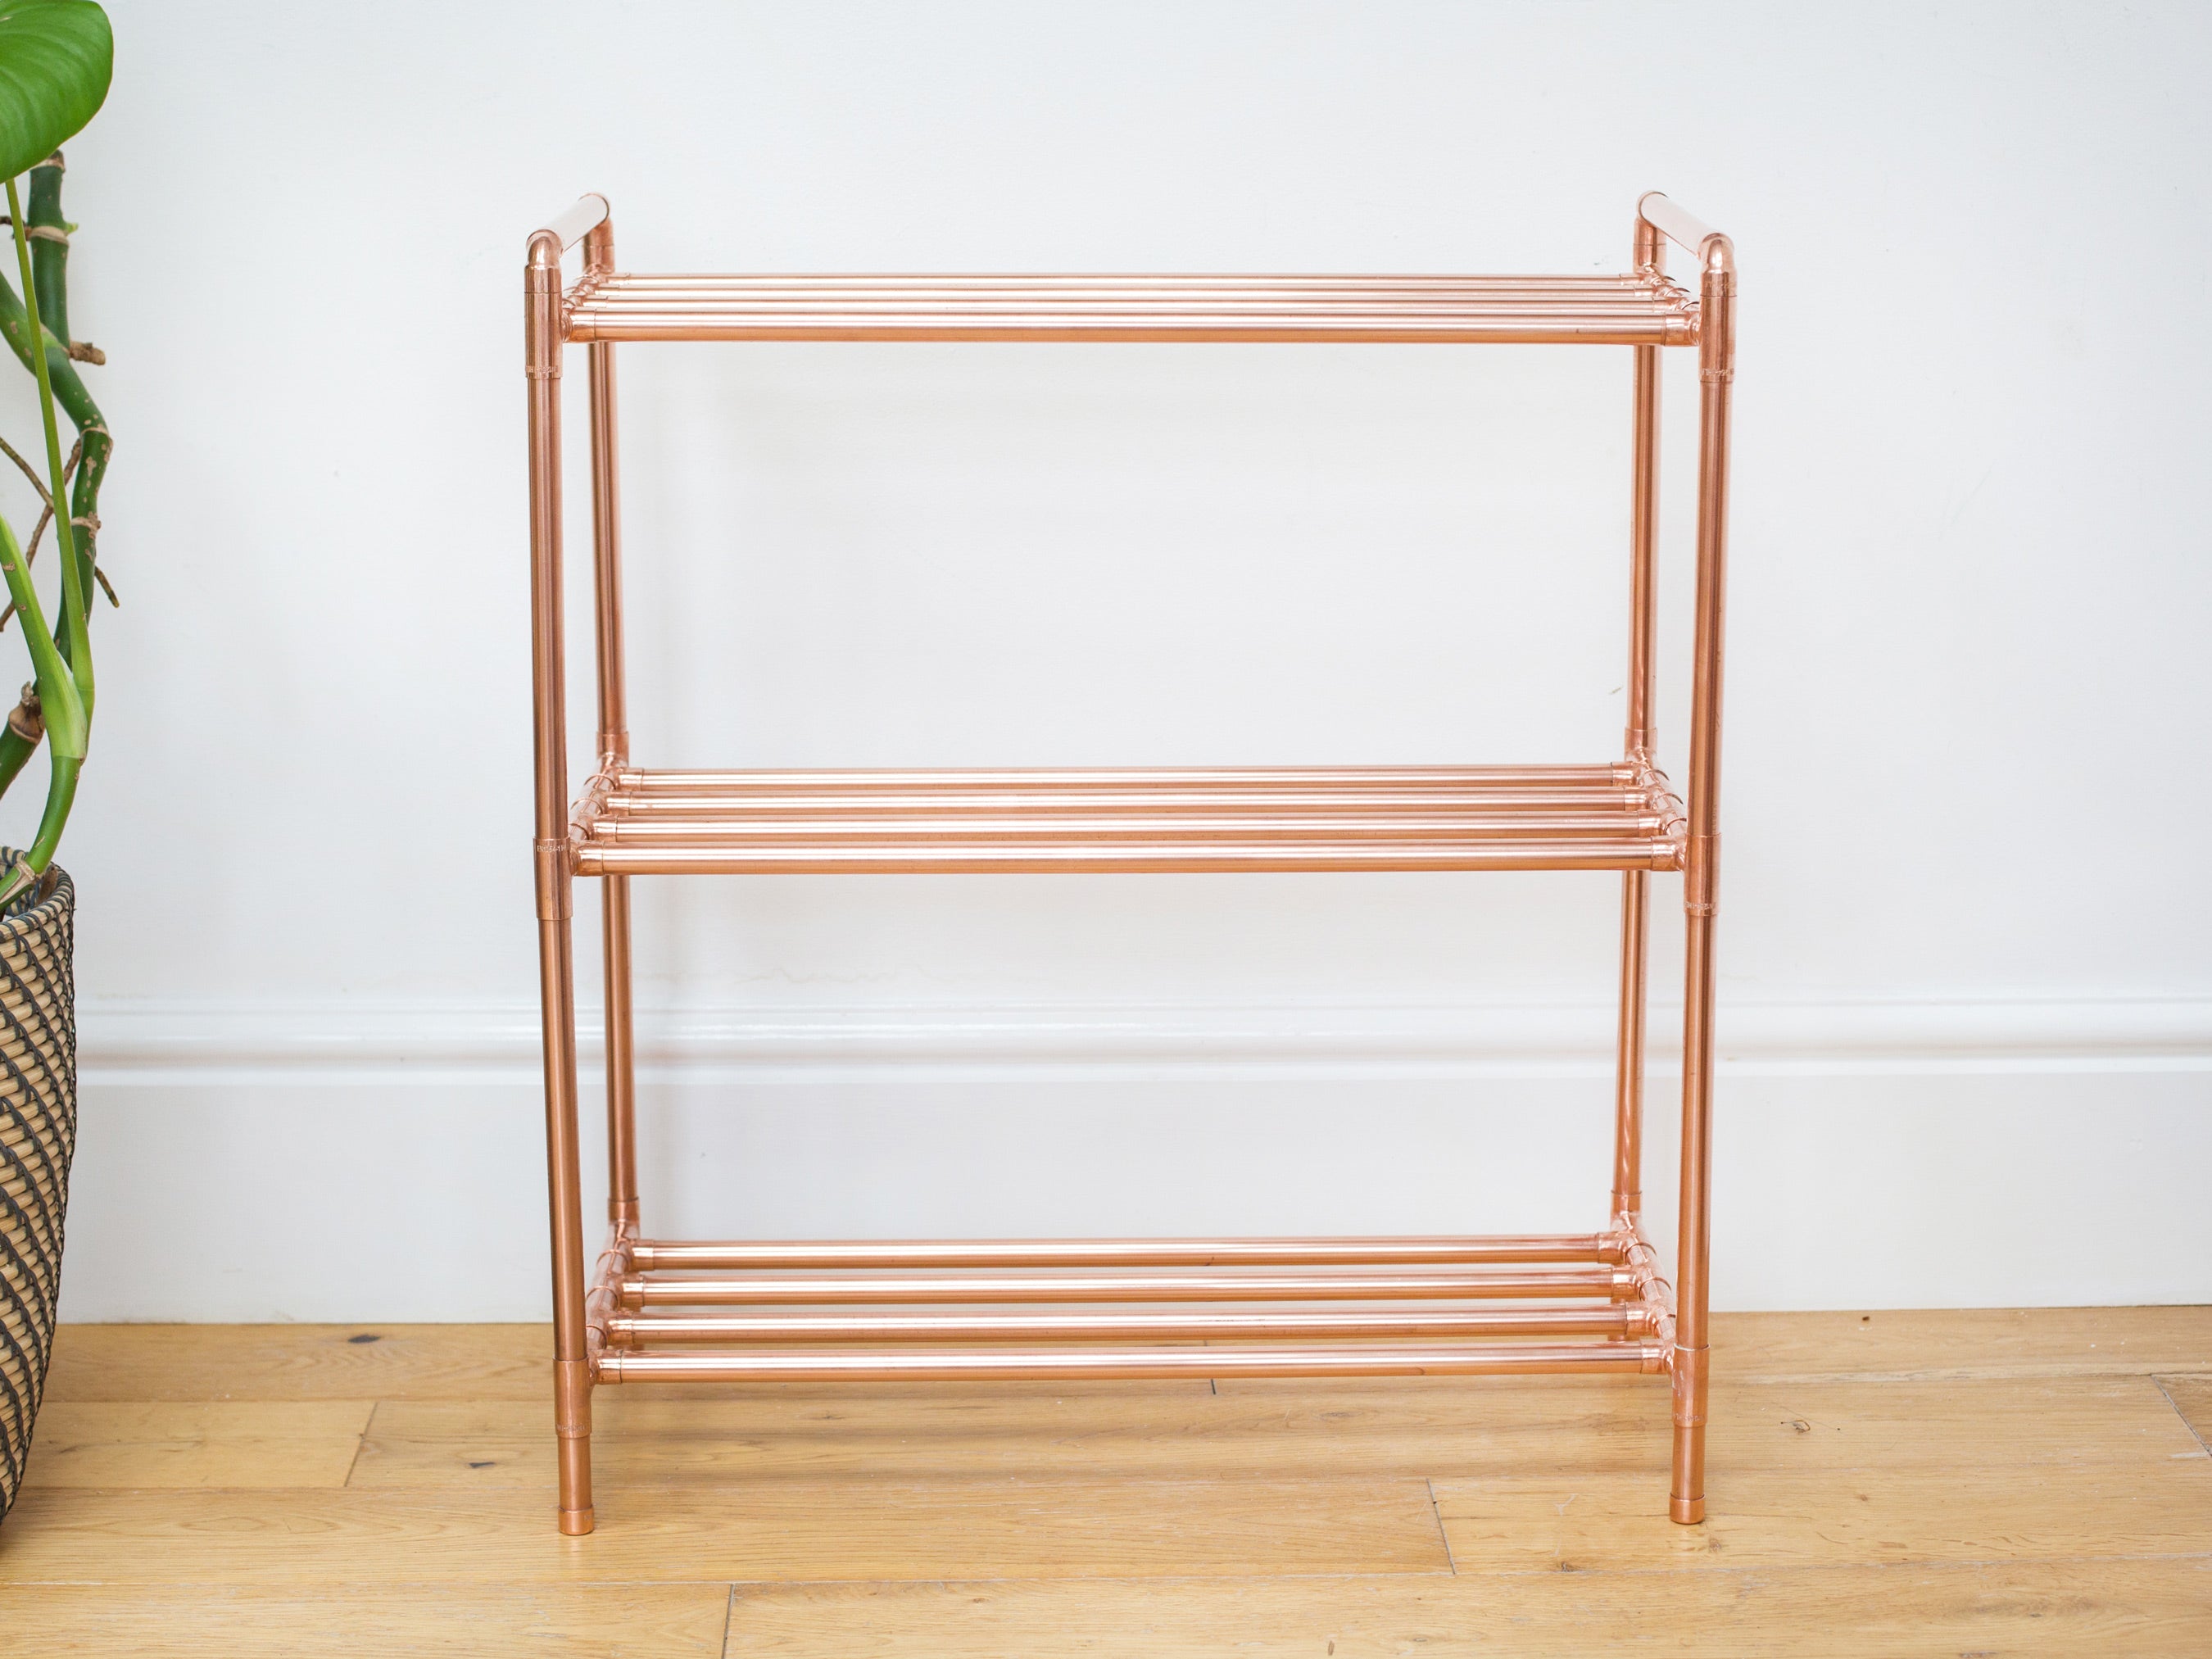 3 Tier Copper Pipe Shoe Rack Handmade With Industrial Fittings Shoe Storage/organisation  